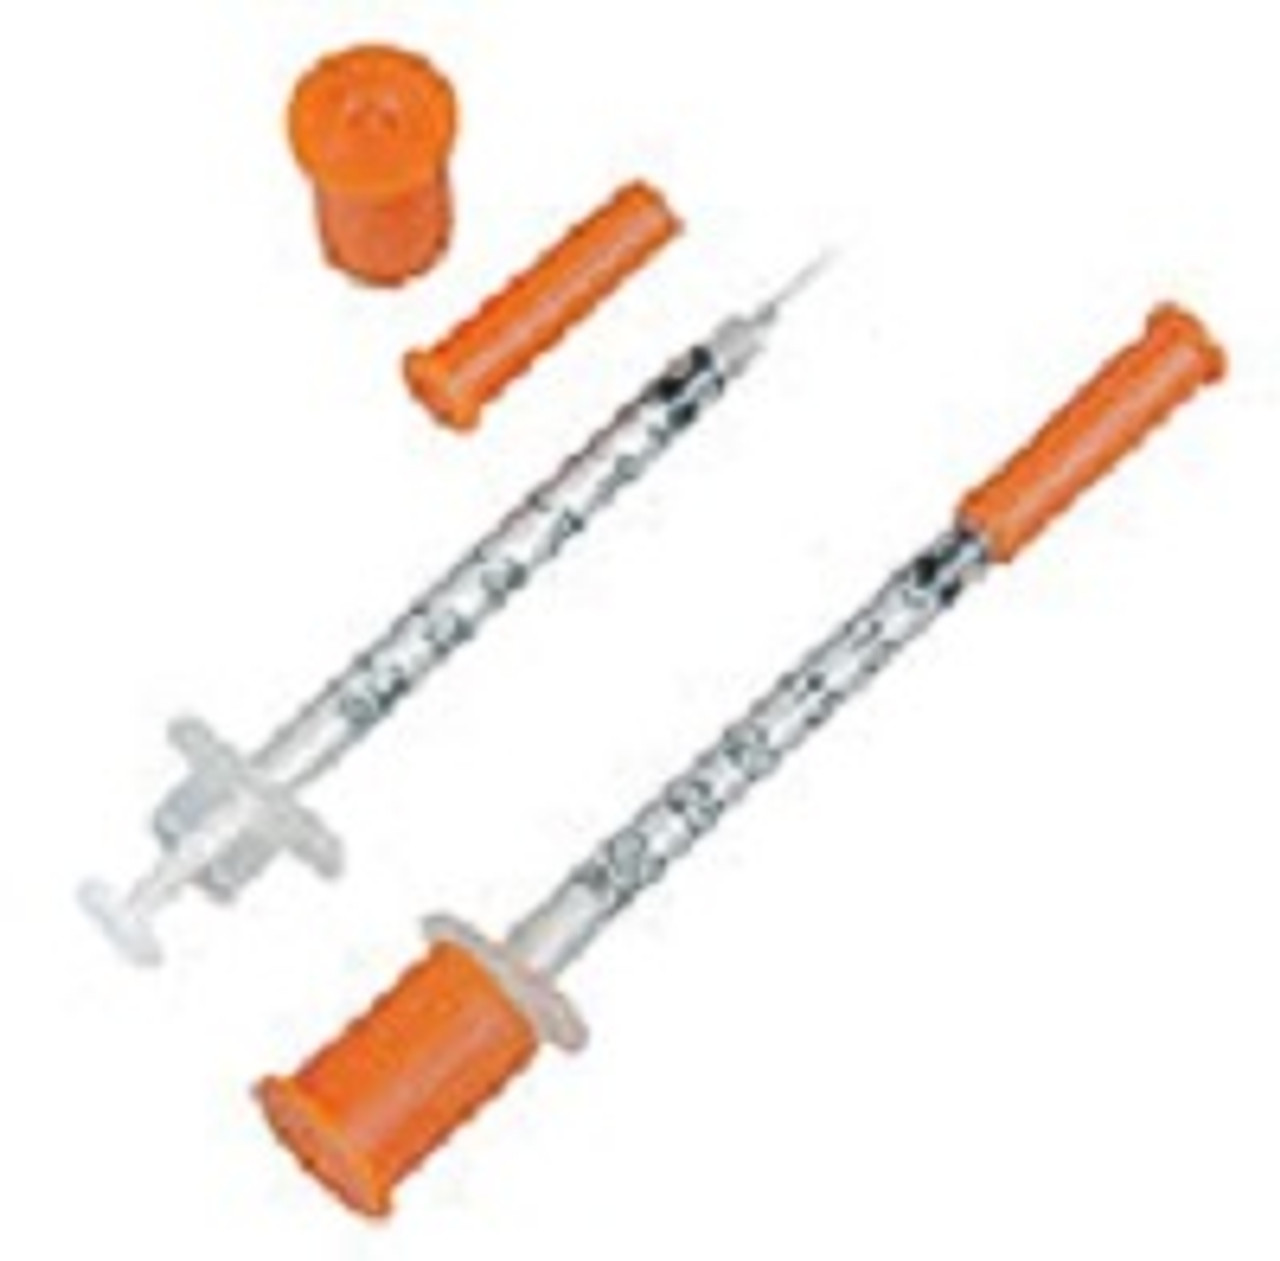 Exel 29g X 1 2 Needle With 1cc U 40 Insulin Syringe 100 Box Predictable Surgical Technologies